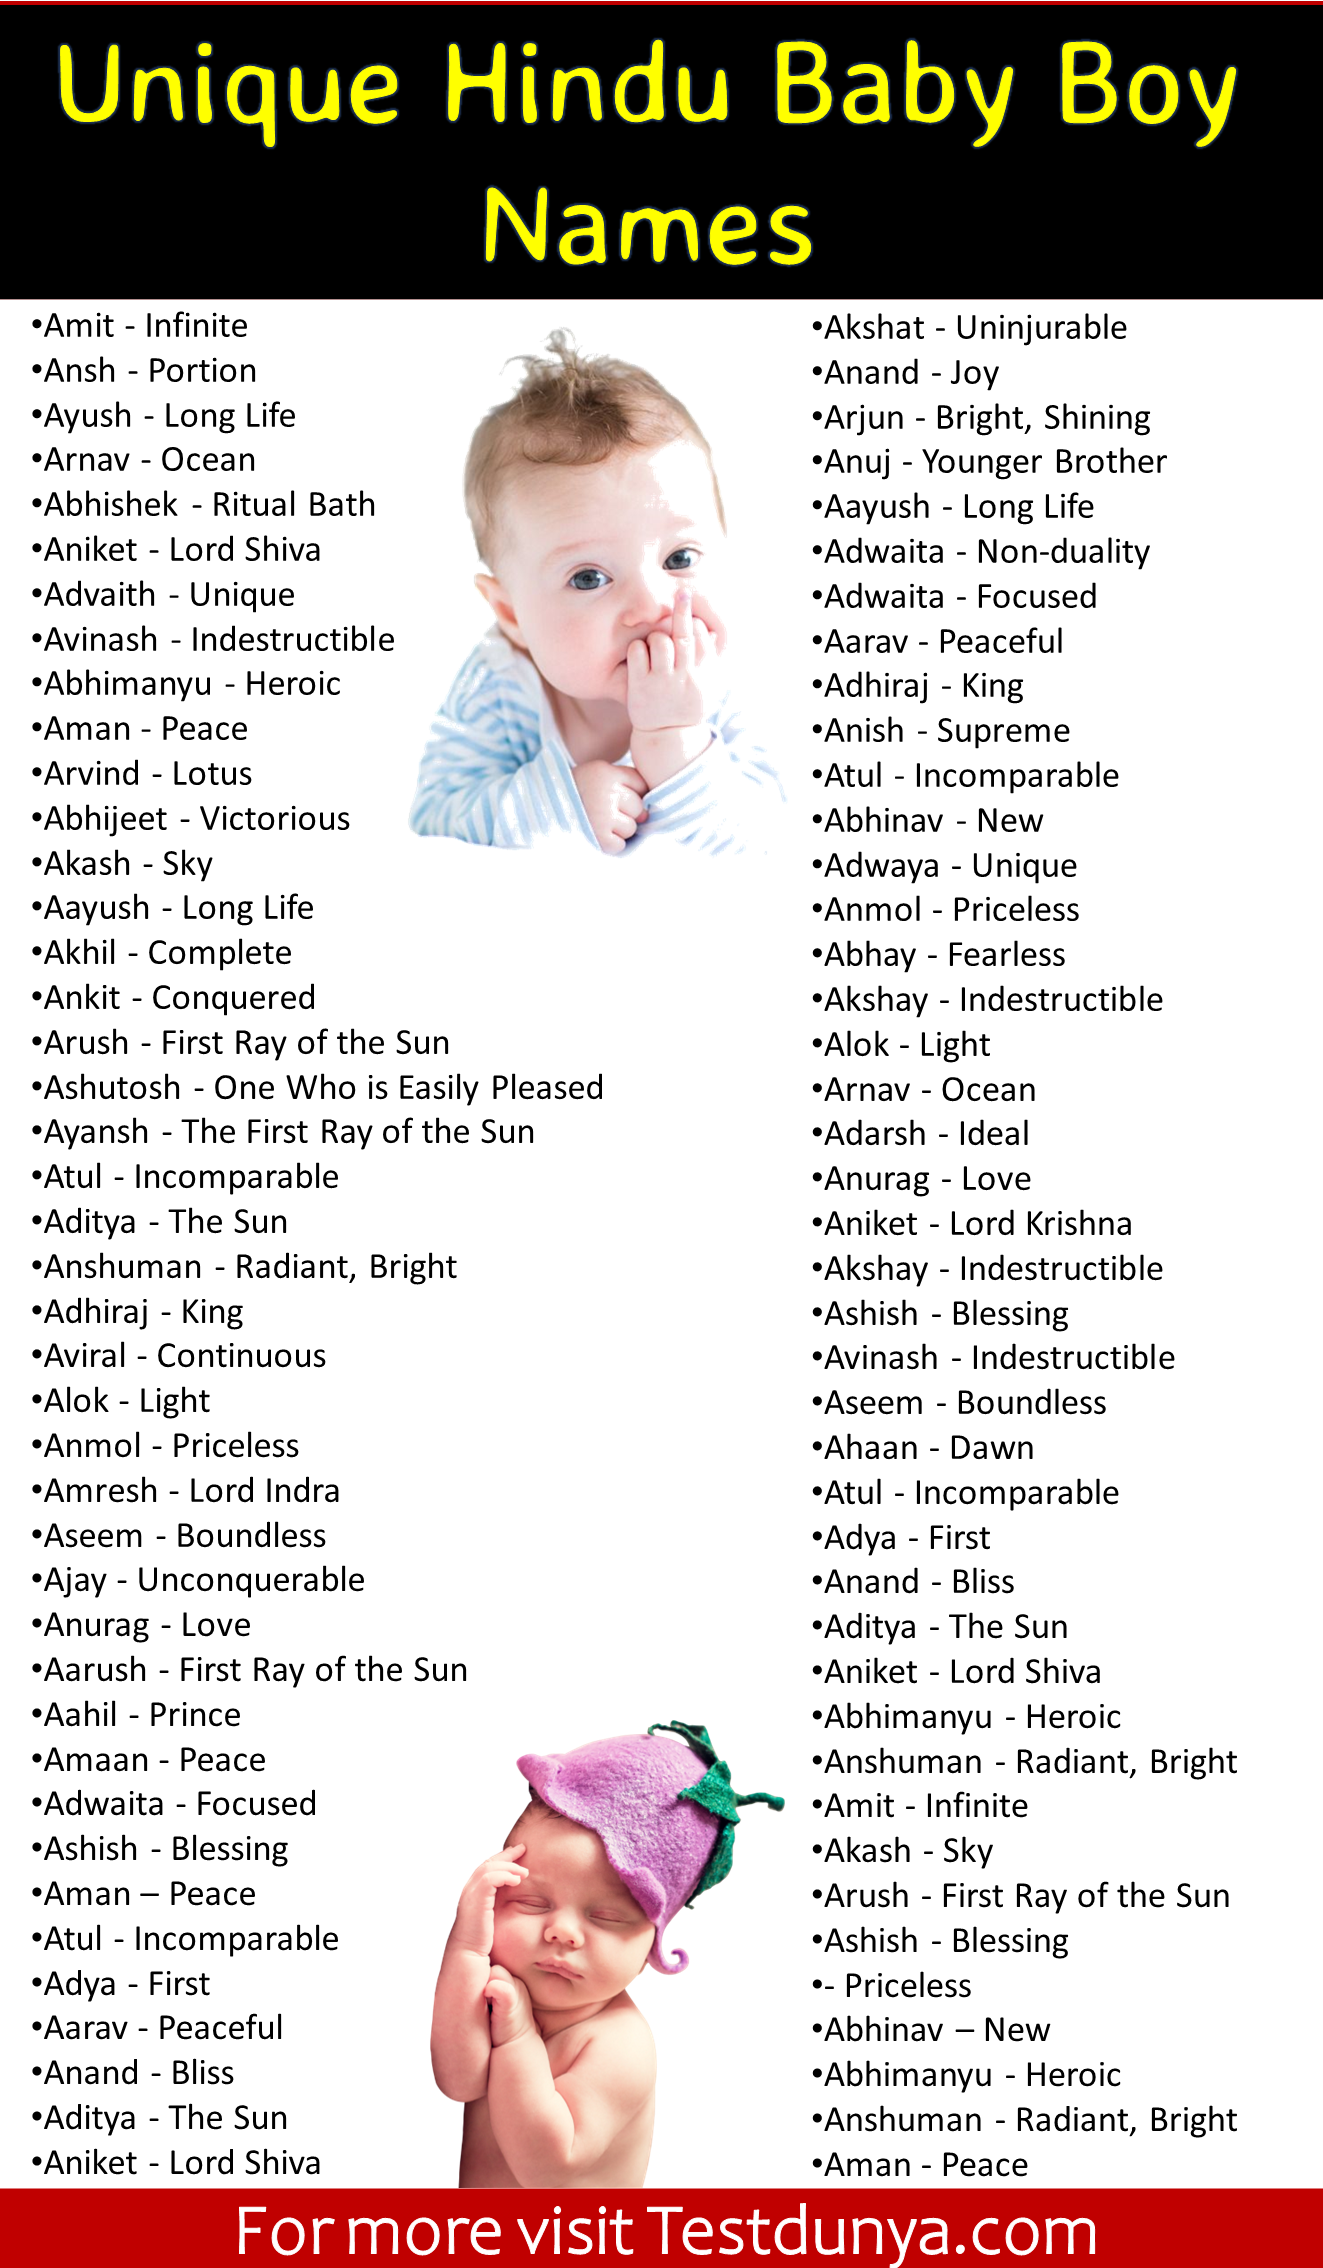 Newborn baby boy unique Hindu names with meaning